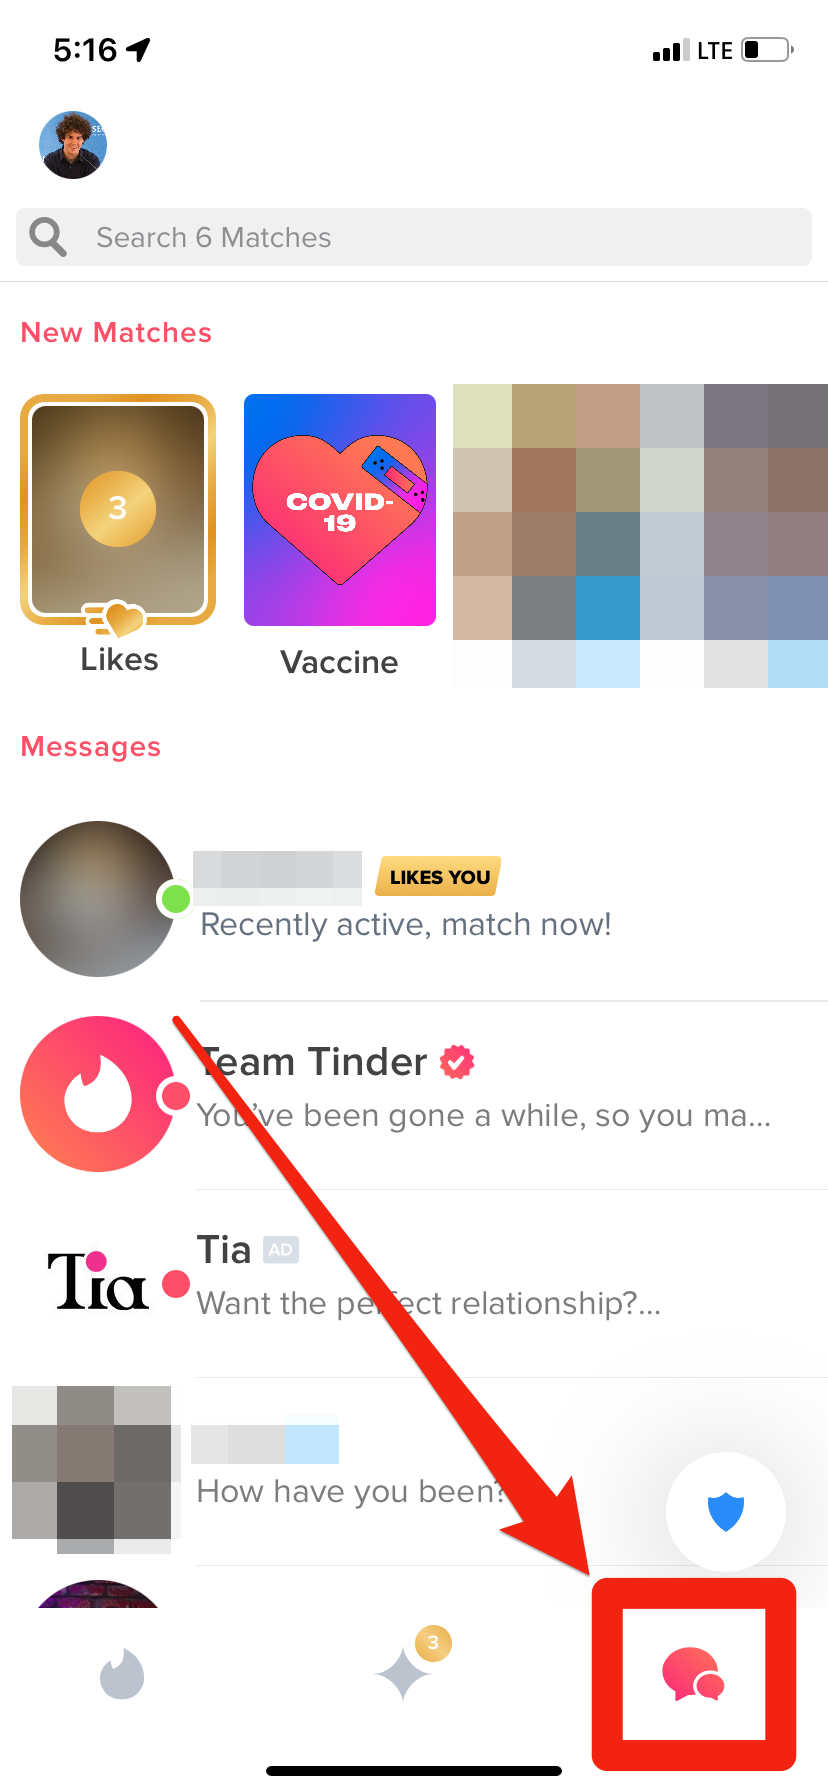 The Tinder chat page, with its icon in the bottom toolbar highlighted.